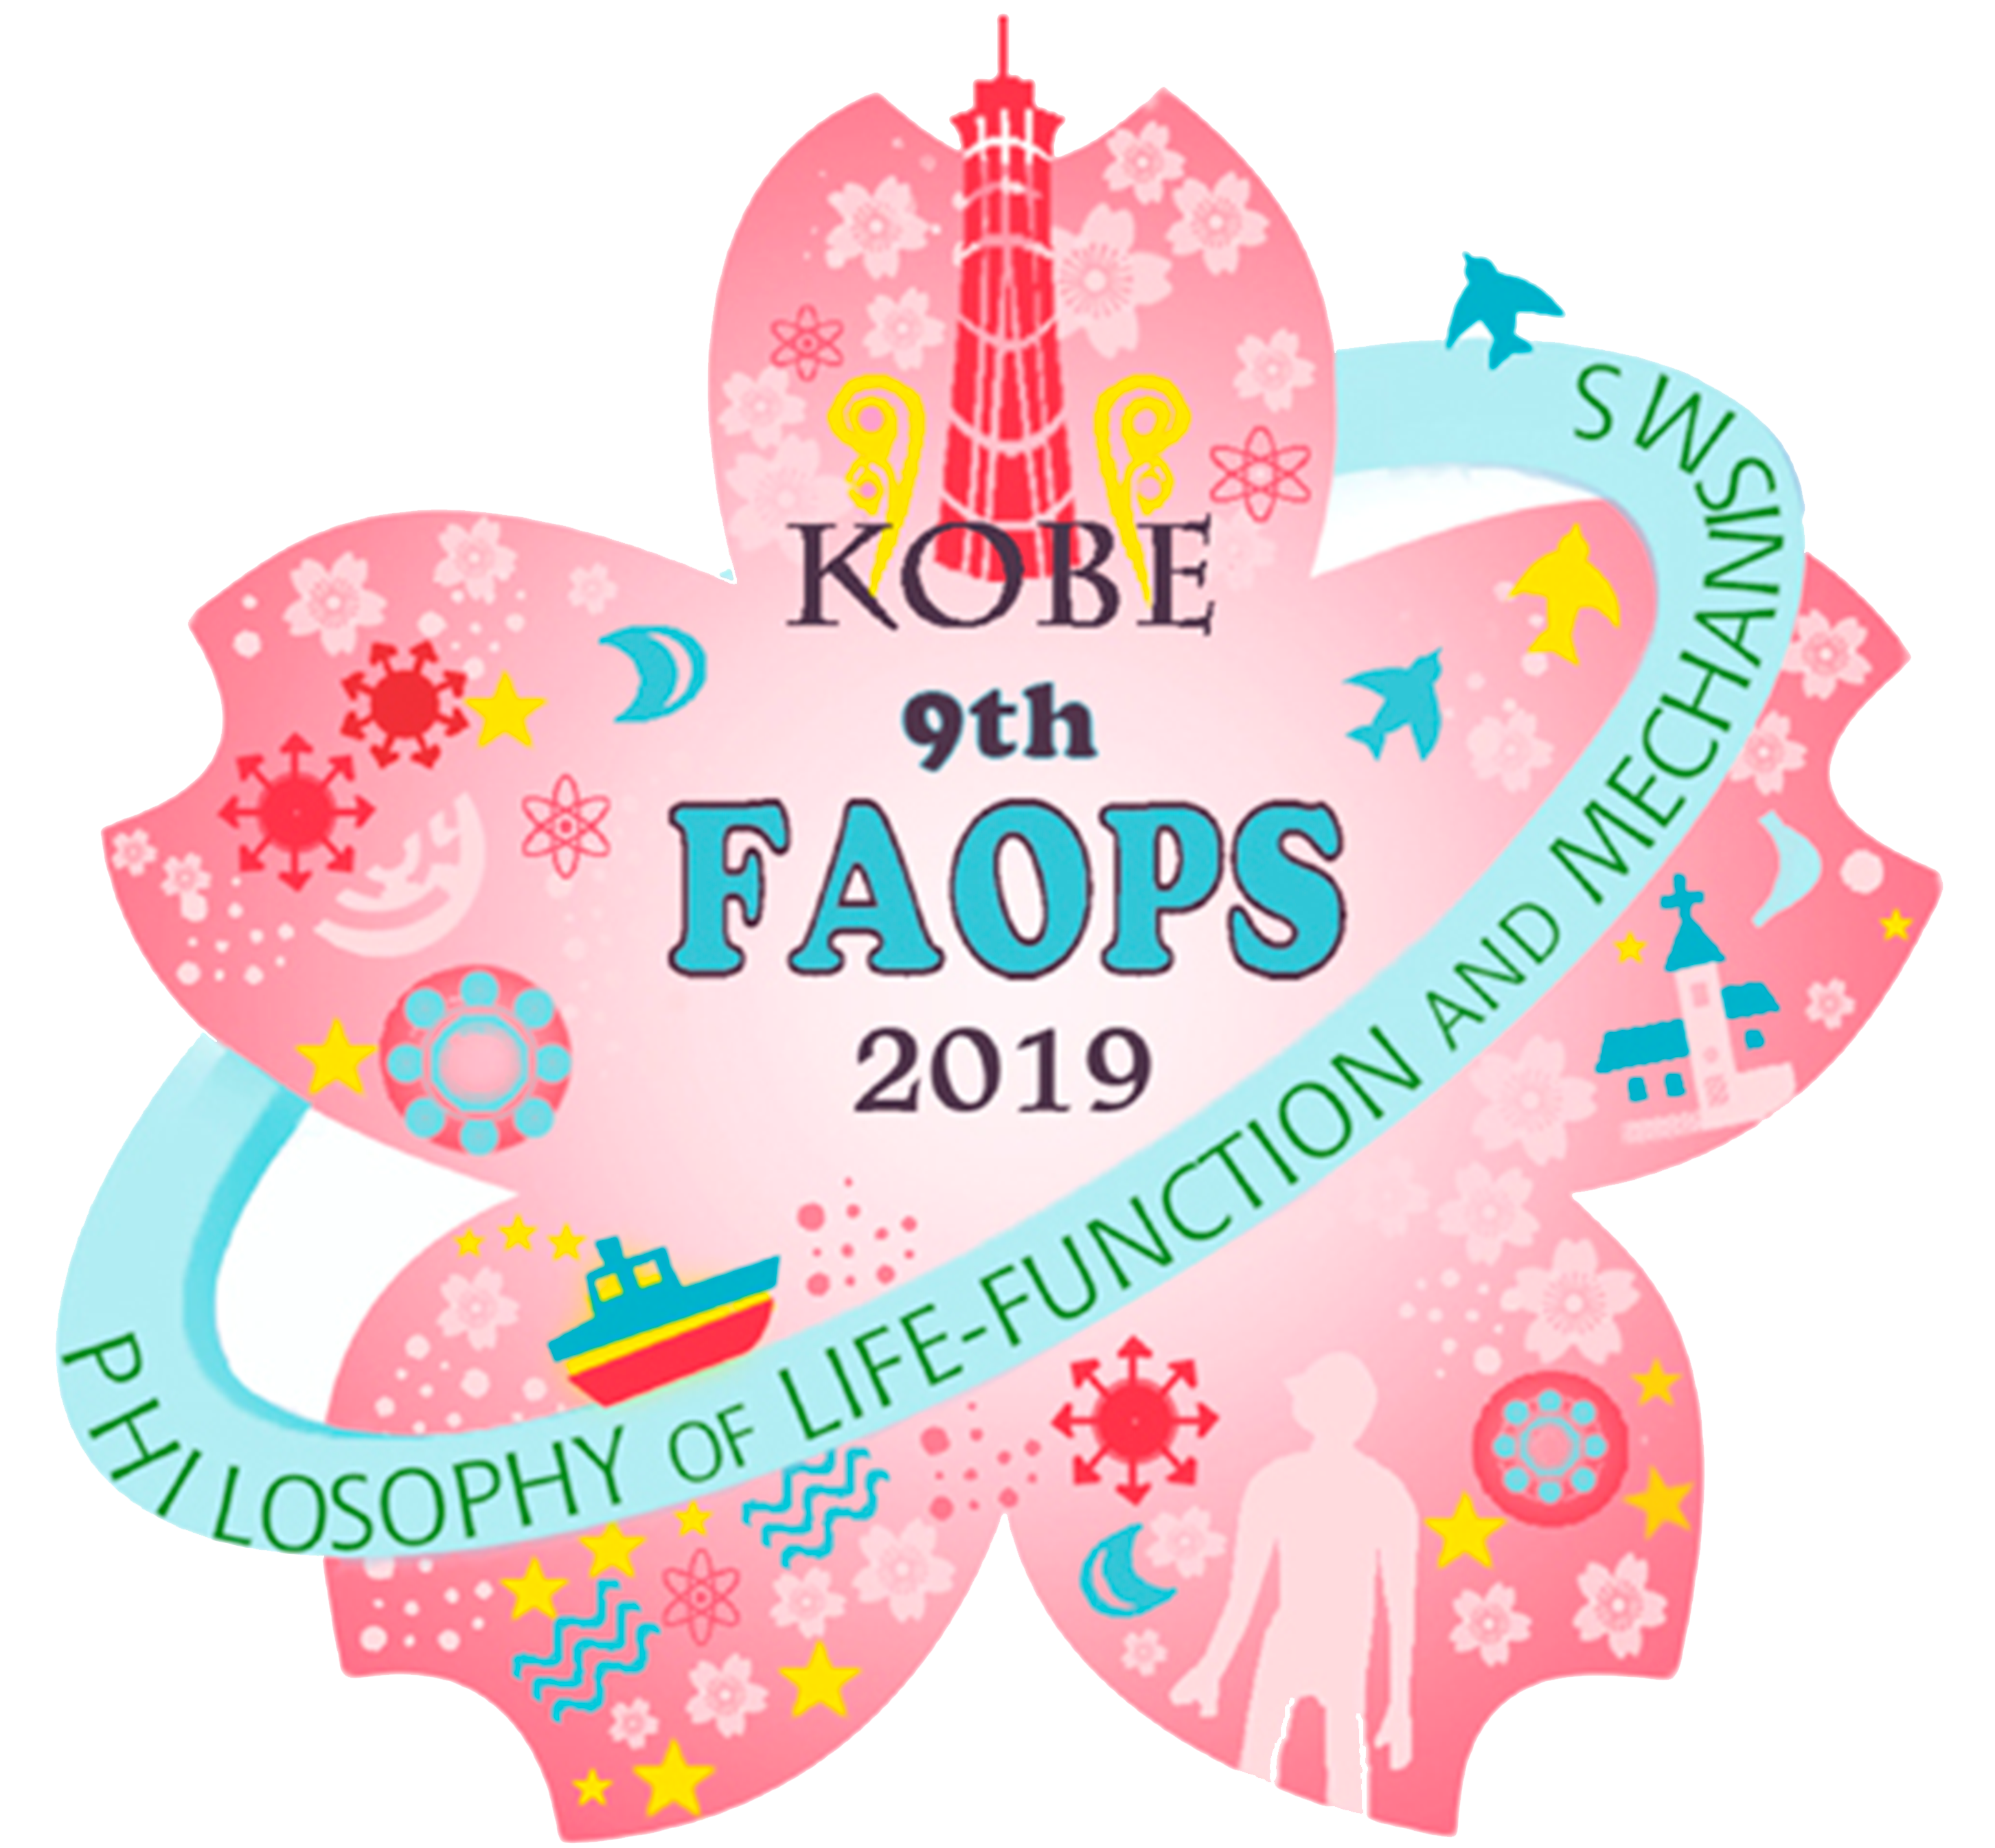 FAOPS2019 image